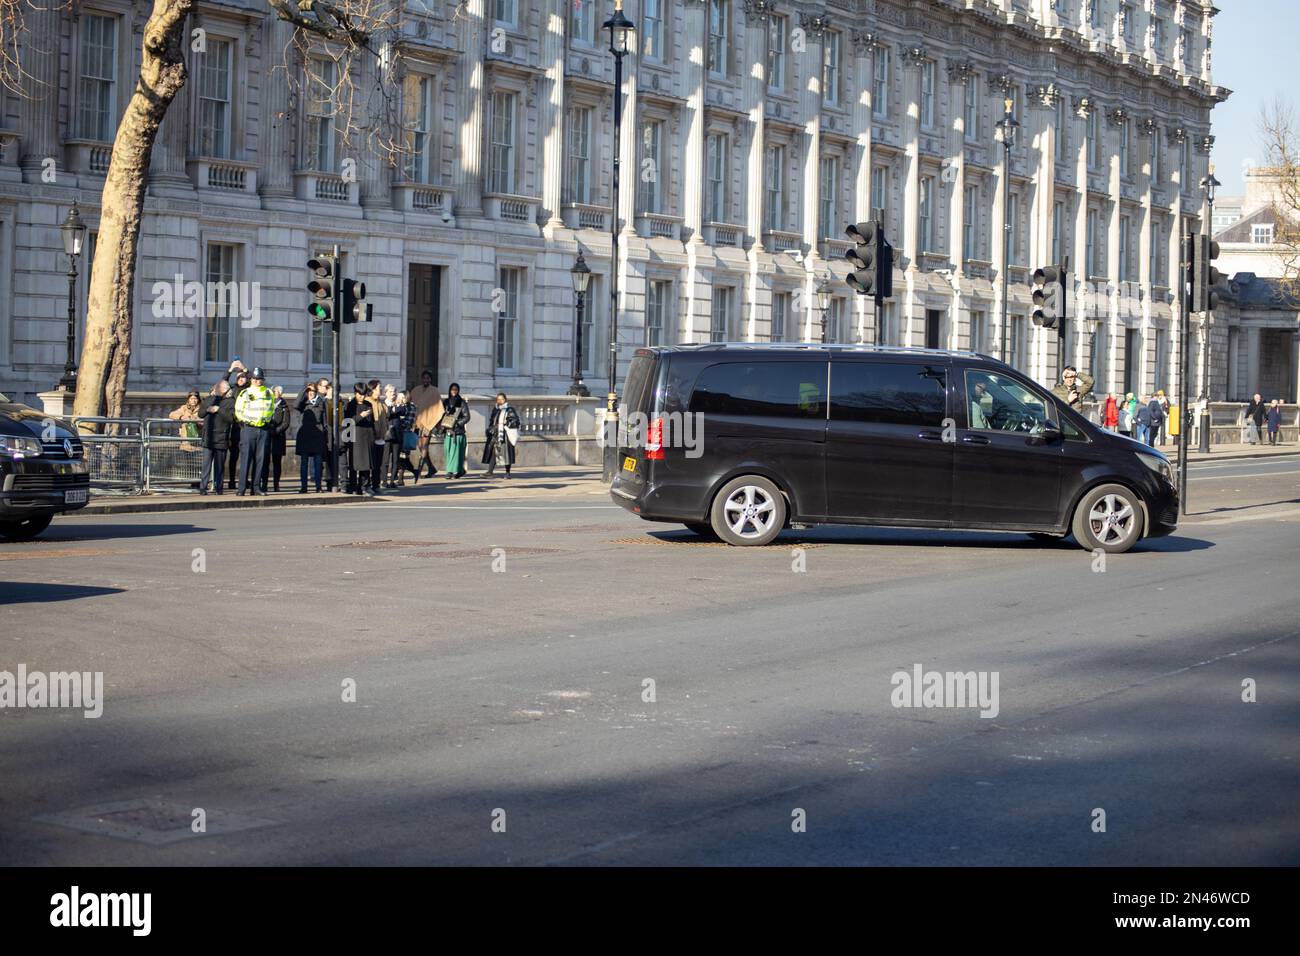 London, UK - Feb 8, 2023: Cars carrying President Volodymyr Zelensky as he makes his first visit to the UK since Russian invasion. Credit: Sinai Noor/Alamy Live News Stock Photo